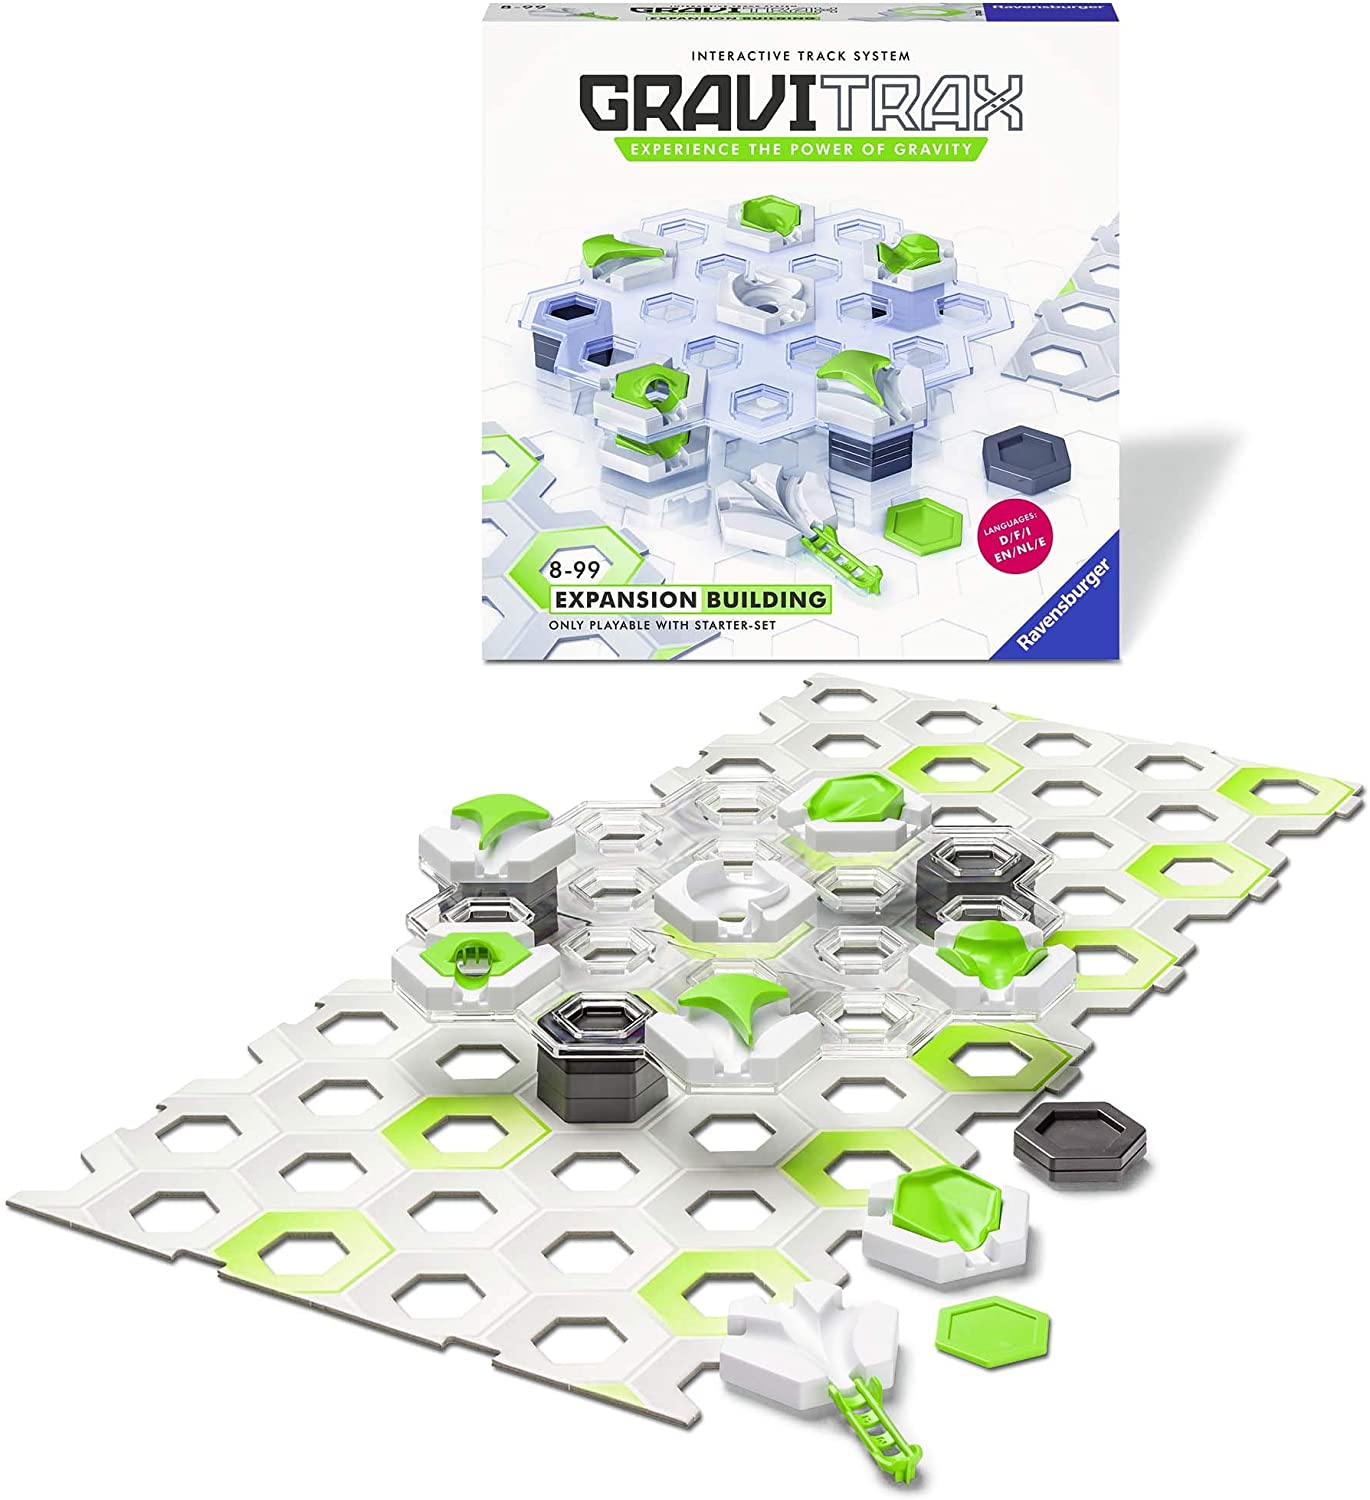 GraviTrax - Building expansion